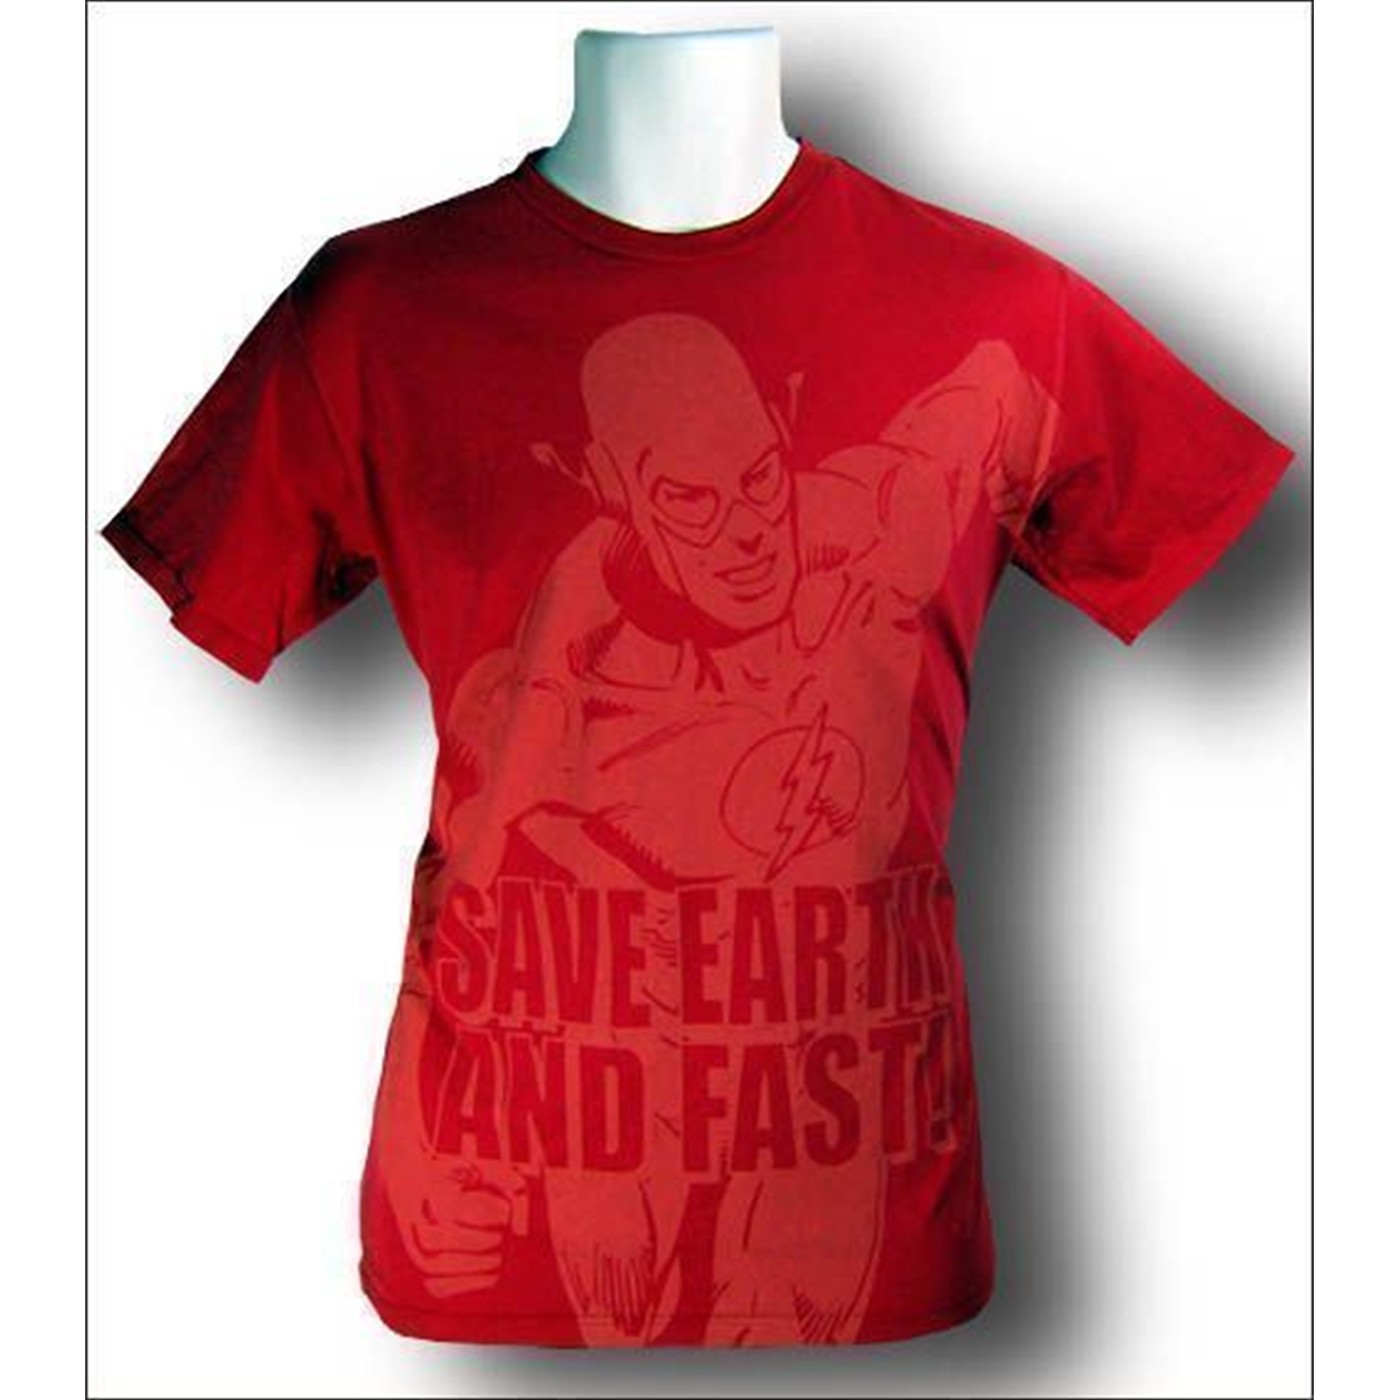 The Flash Save Earth Fast T-Shirt